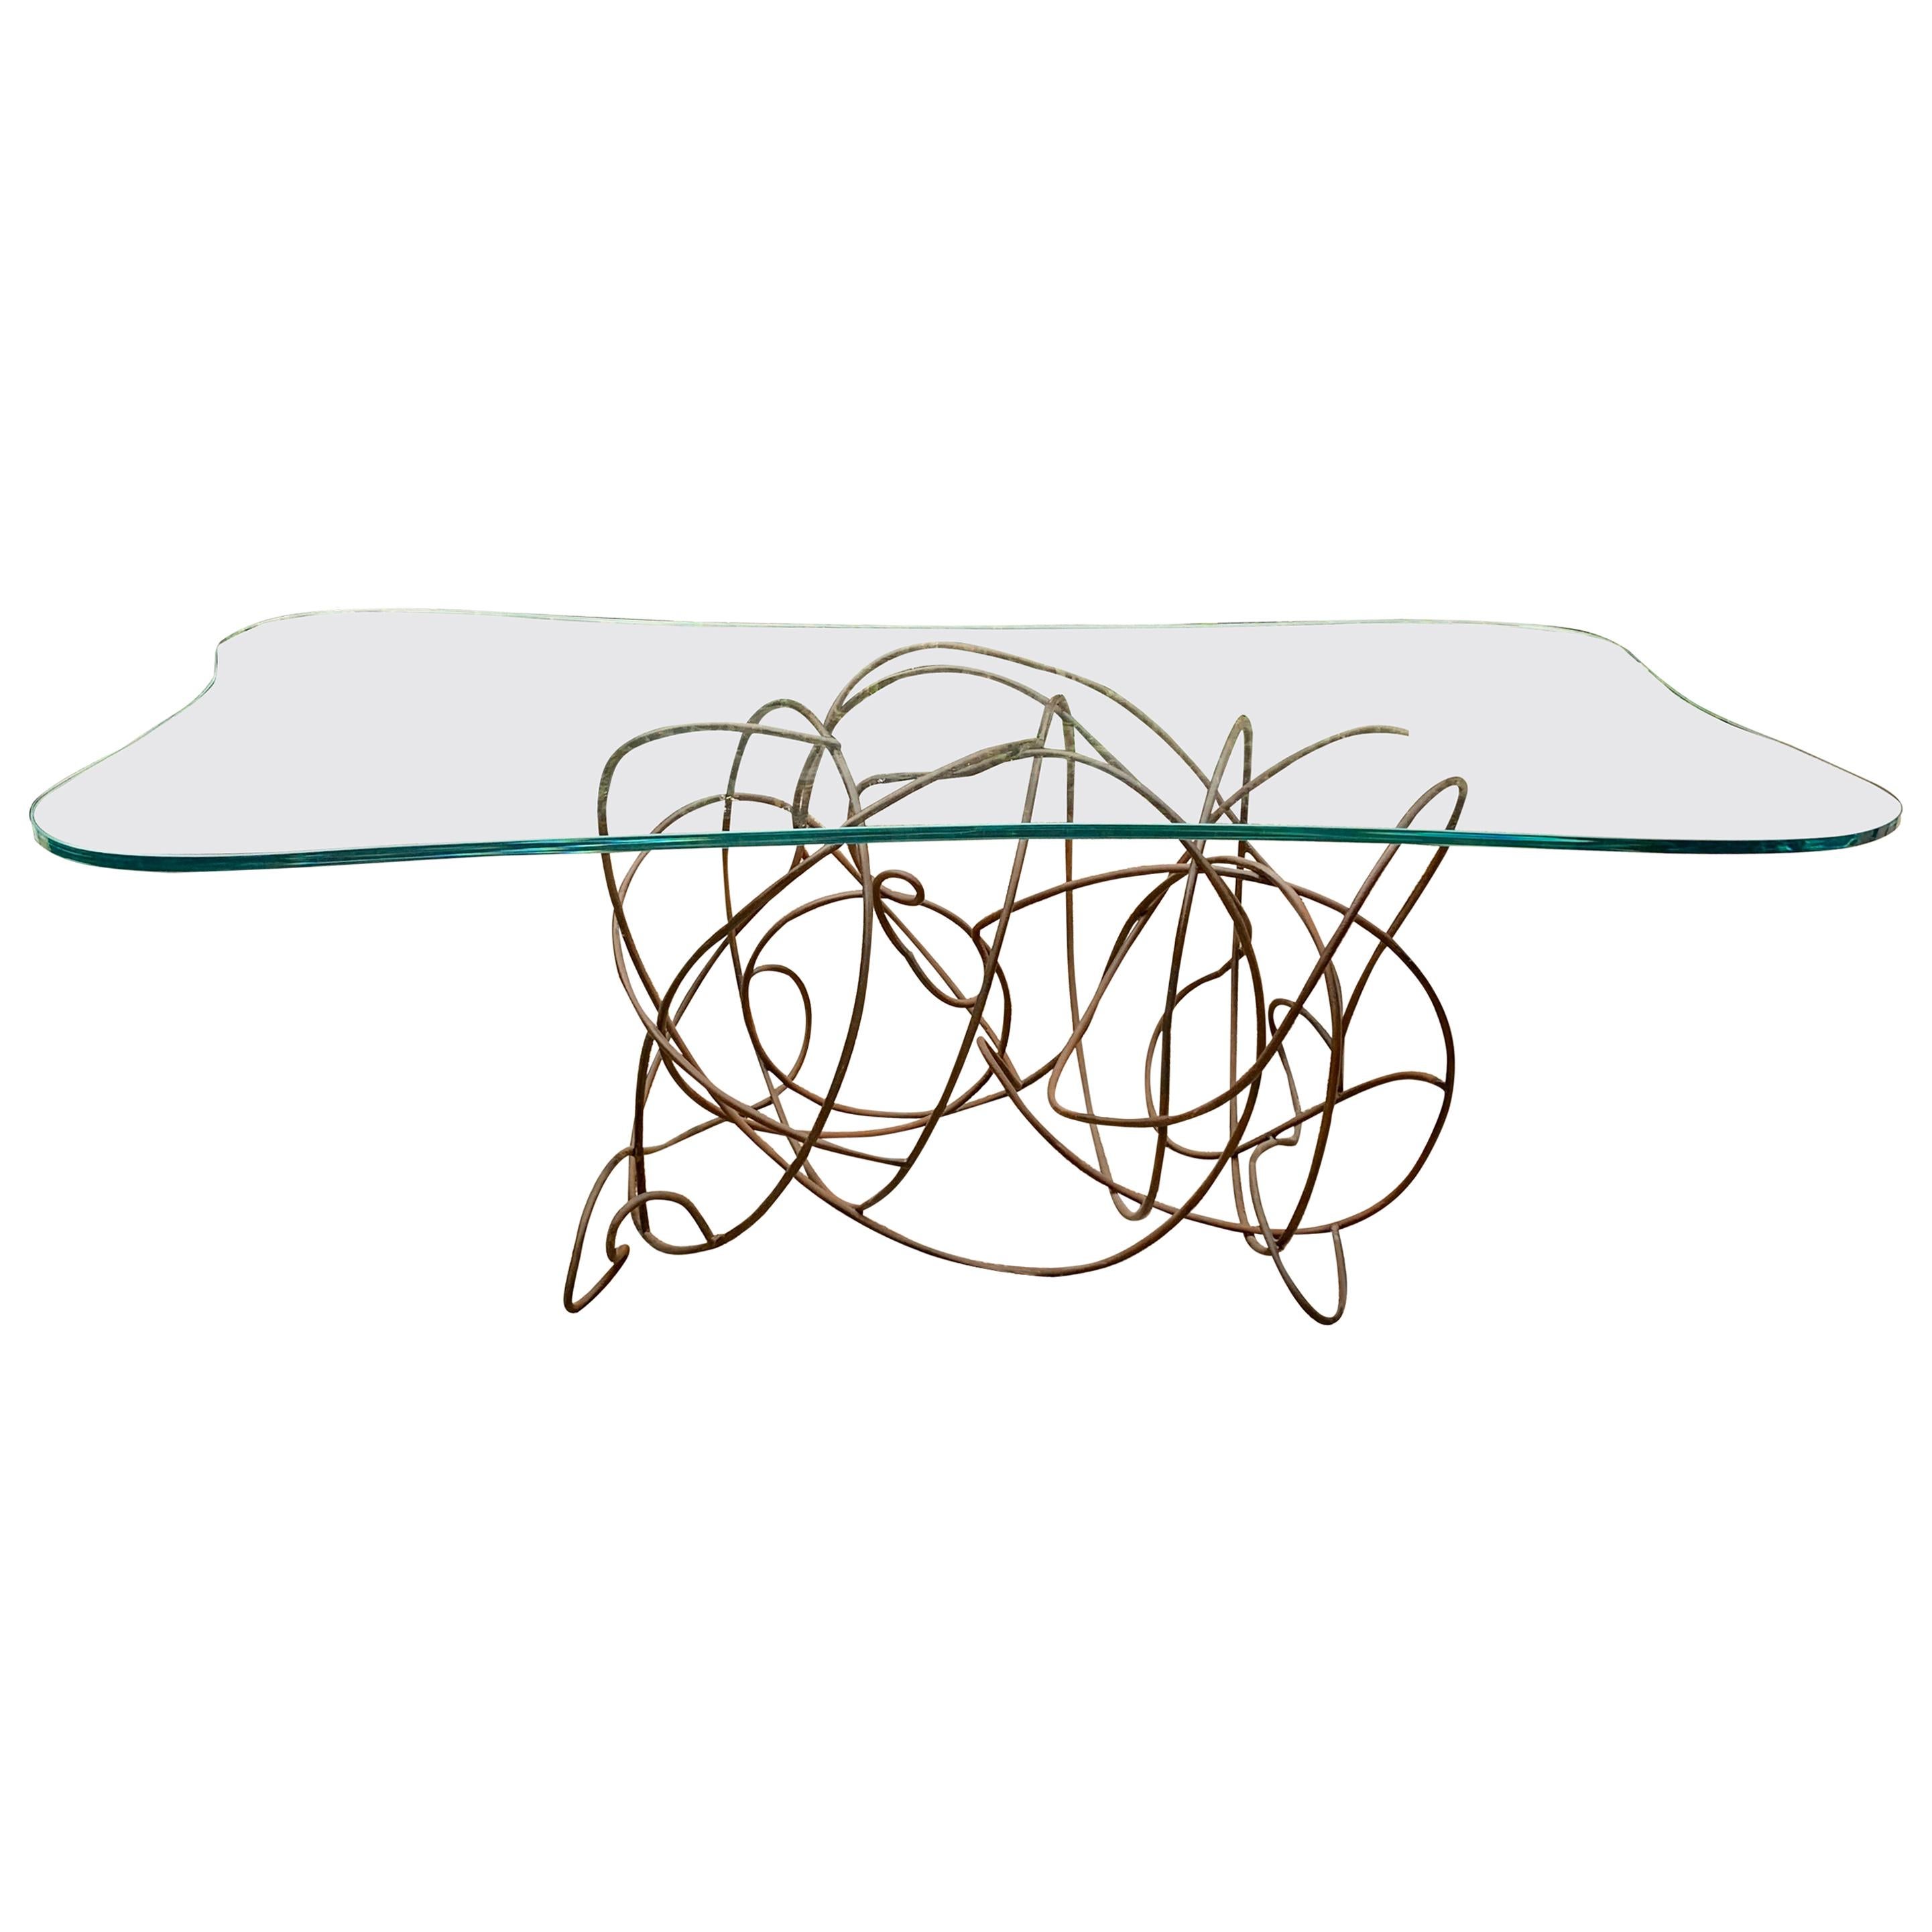 Freeform Metal Dining Console Table by Artist Patricia Larsen